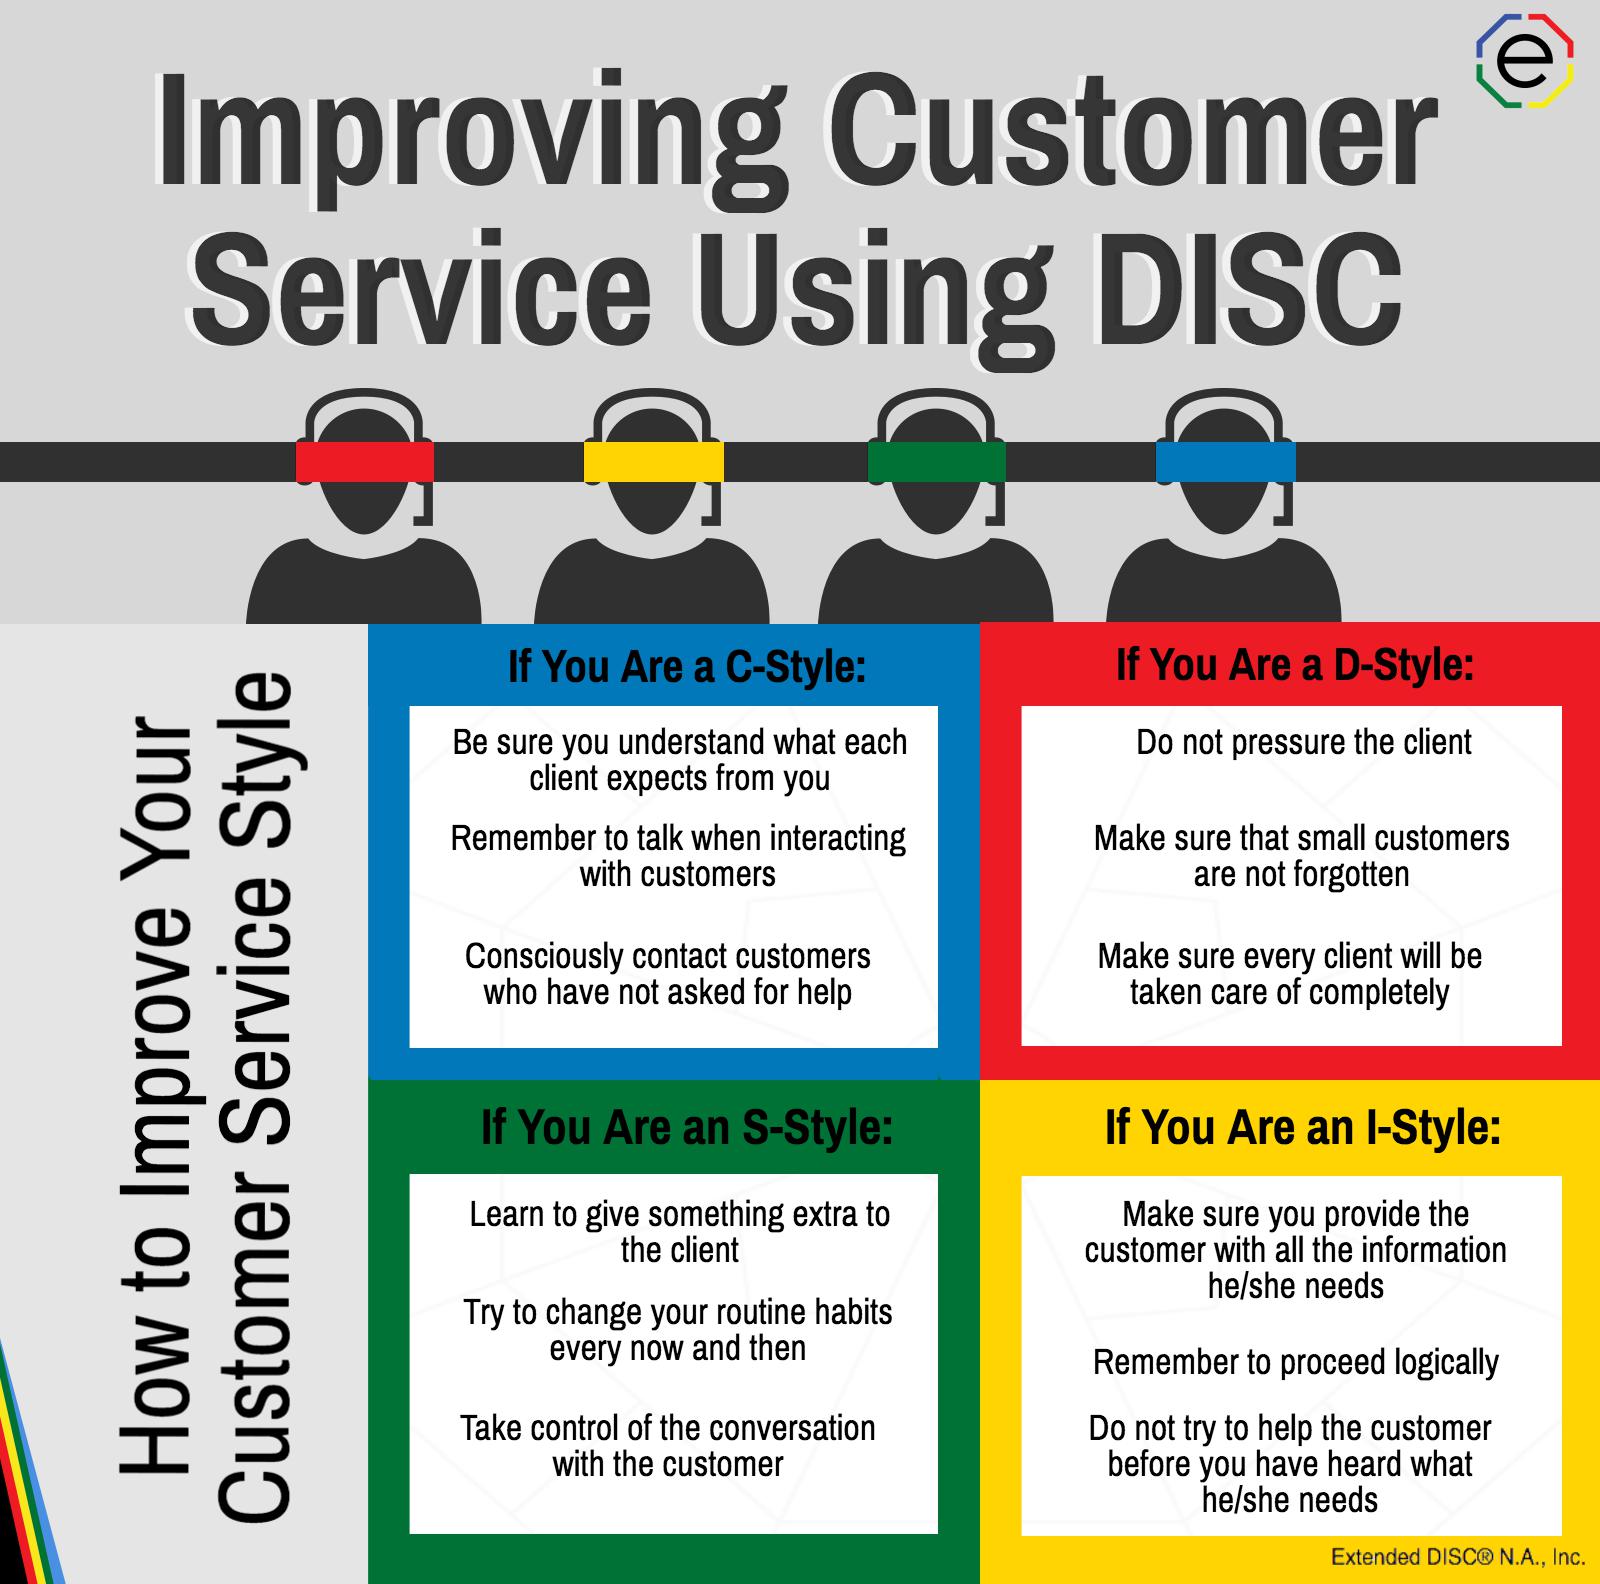 Customer Service Improves Using DISC Assessments